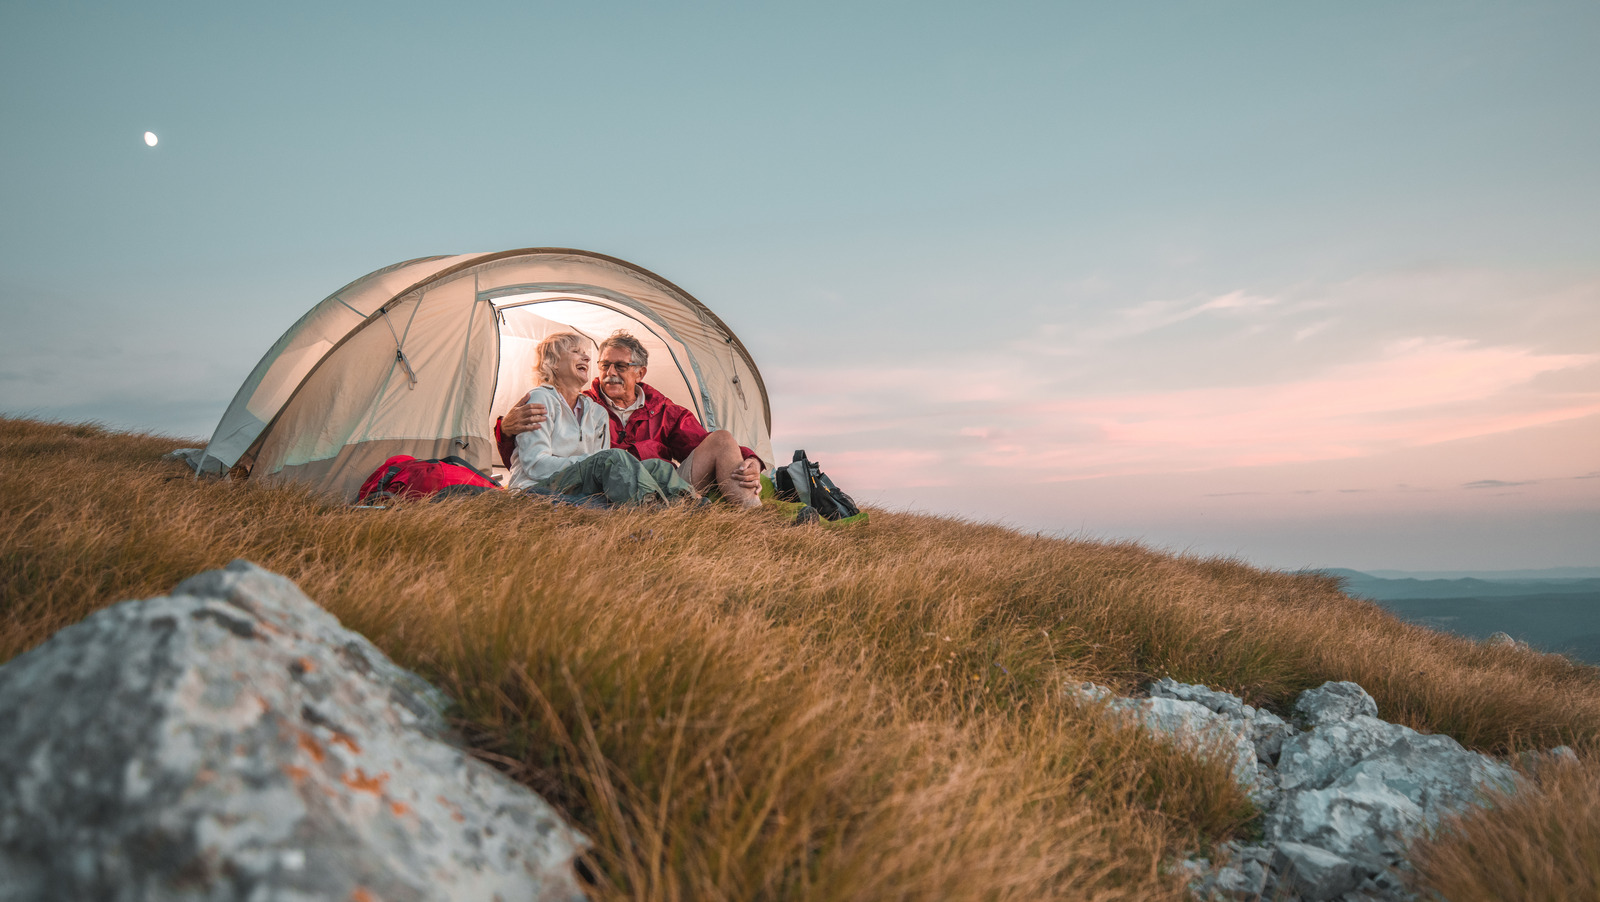 adam jaspers share college couples camping trip photos